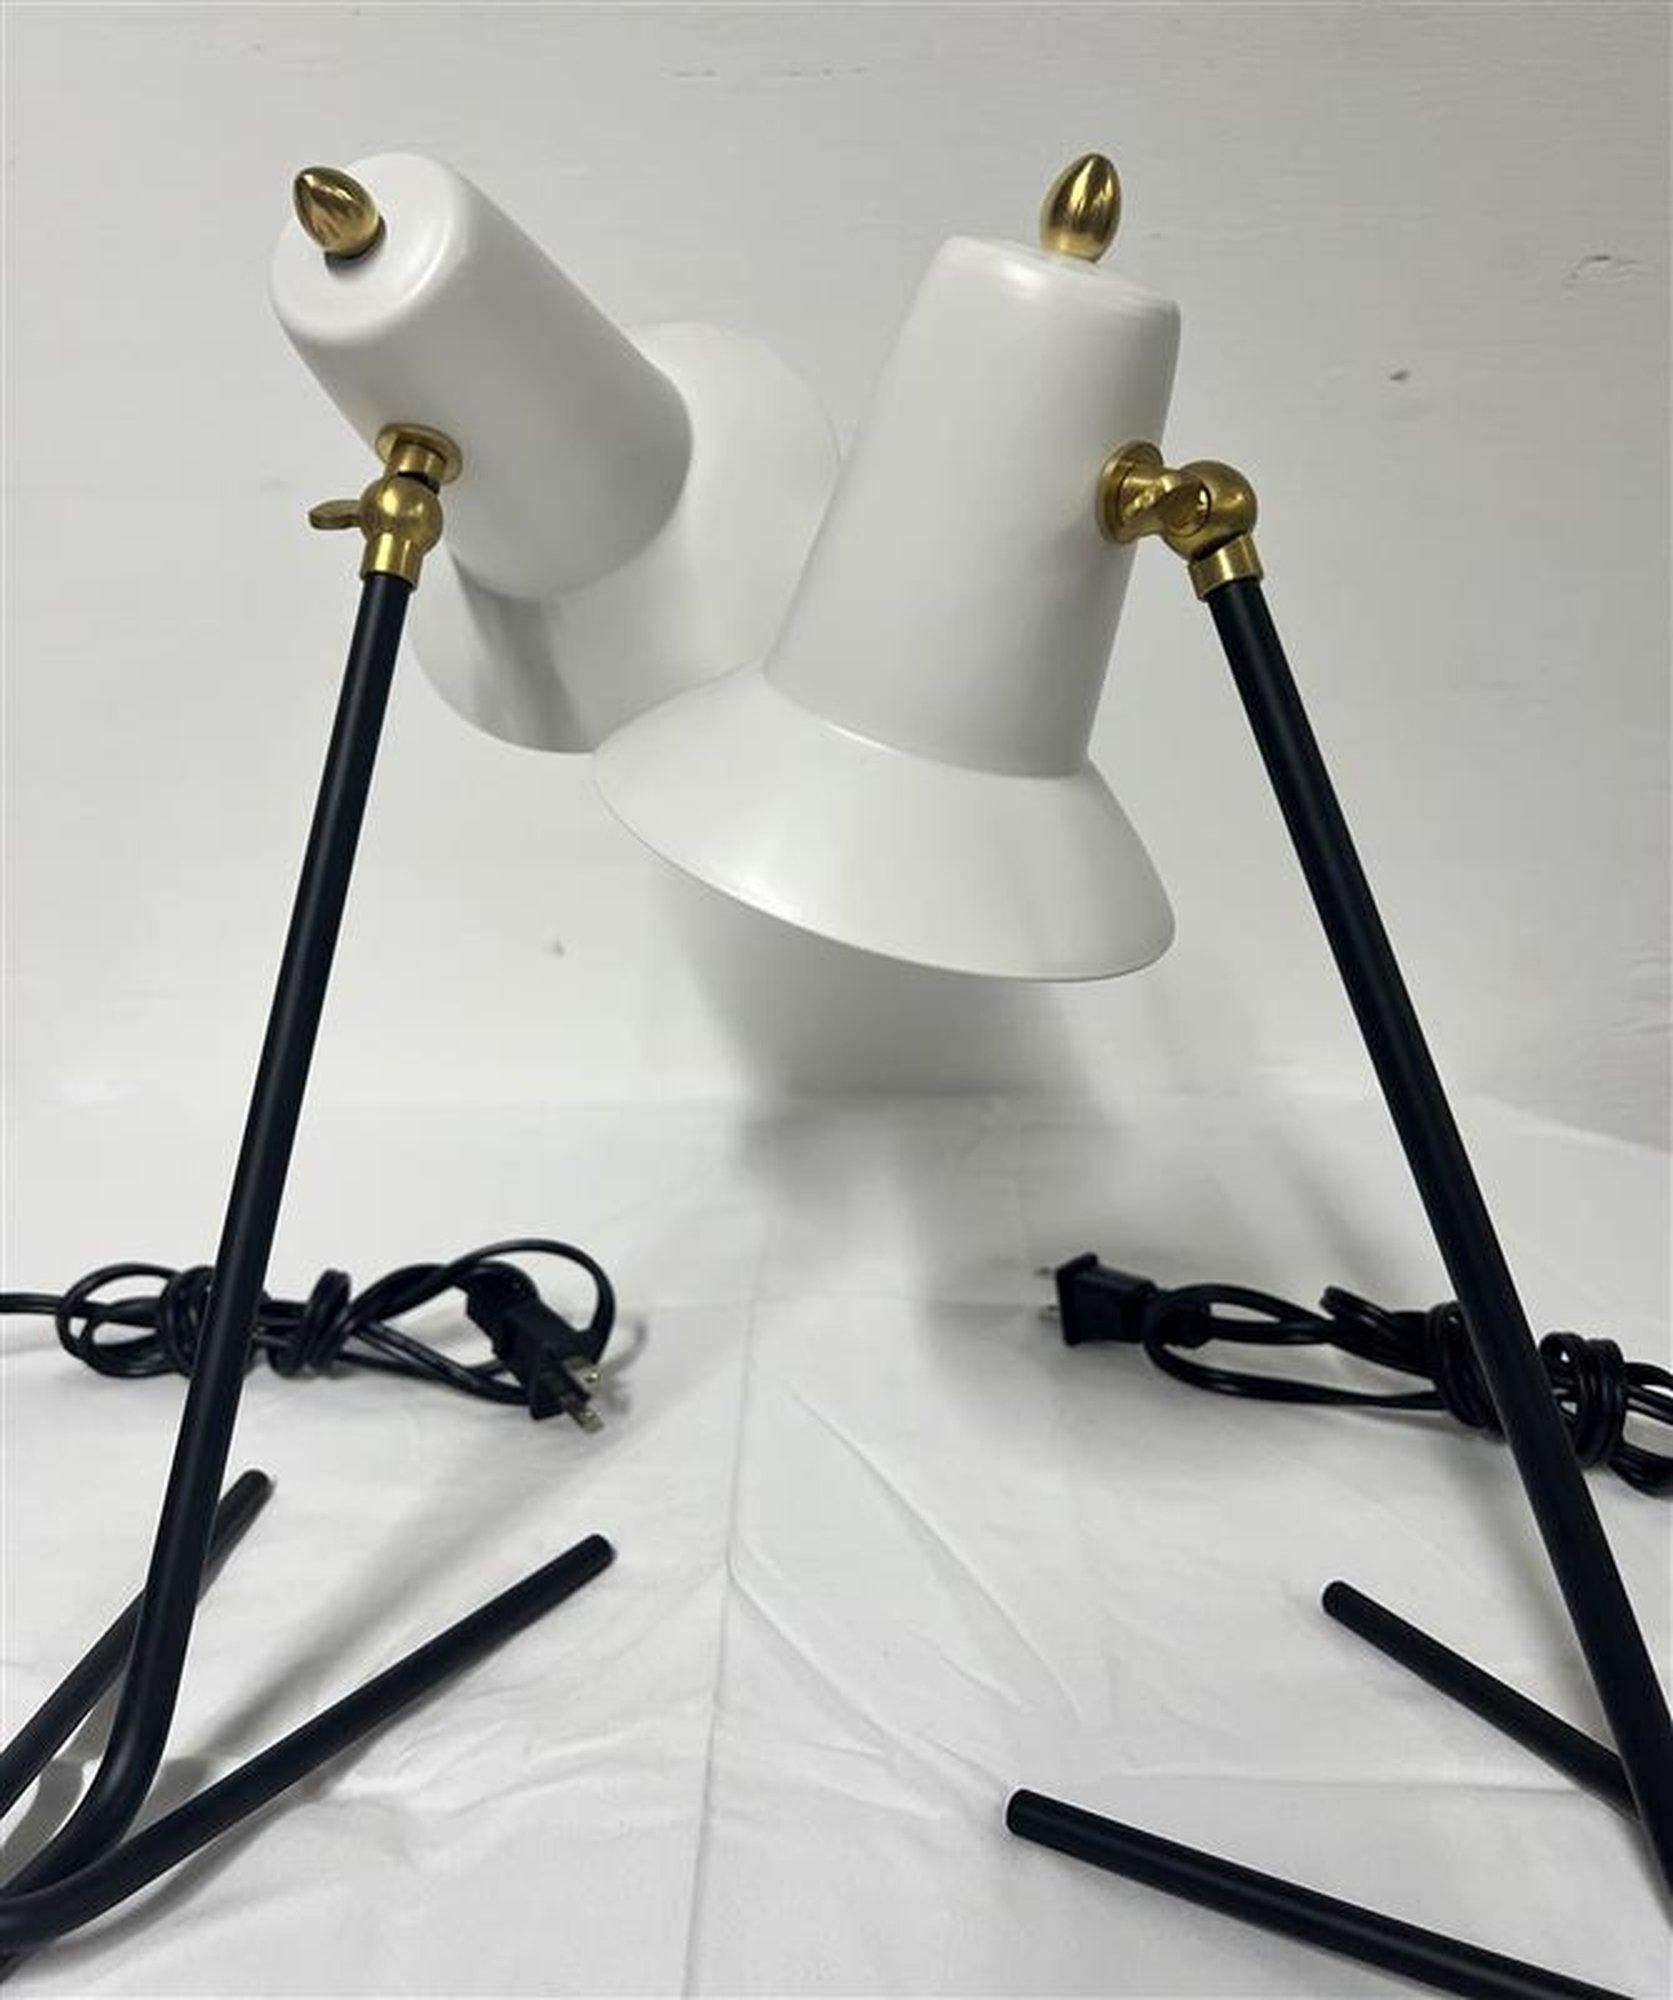 A pair of beautiful Italian Table Lamps by G.C.M.E with enameled black painted base and white cones with brass details. 
New old inventory

Wired for U.S. use.

